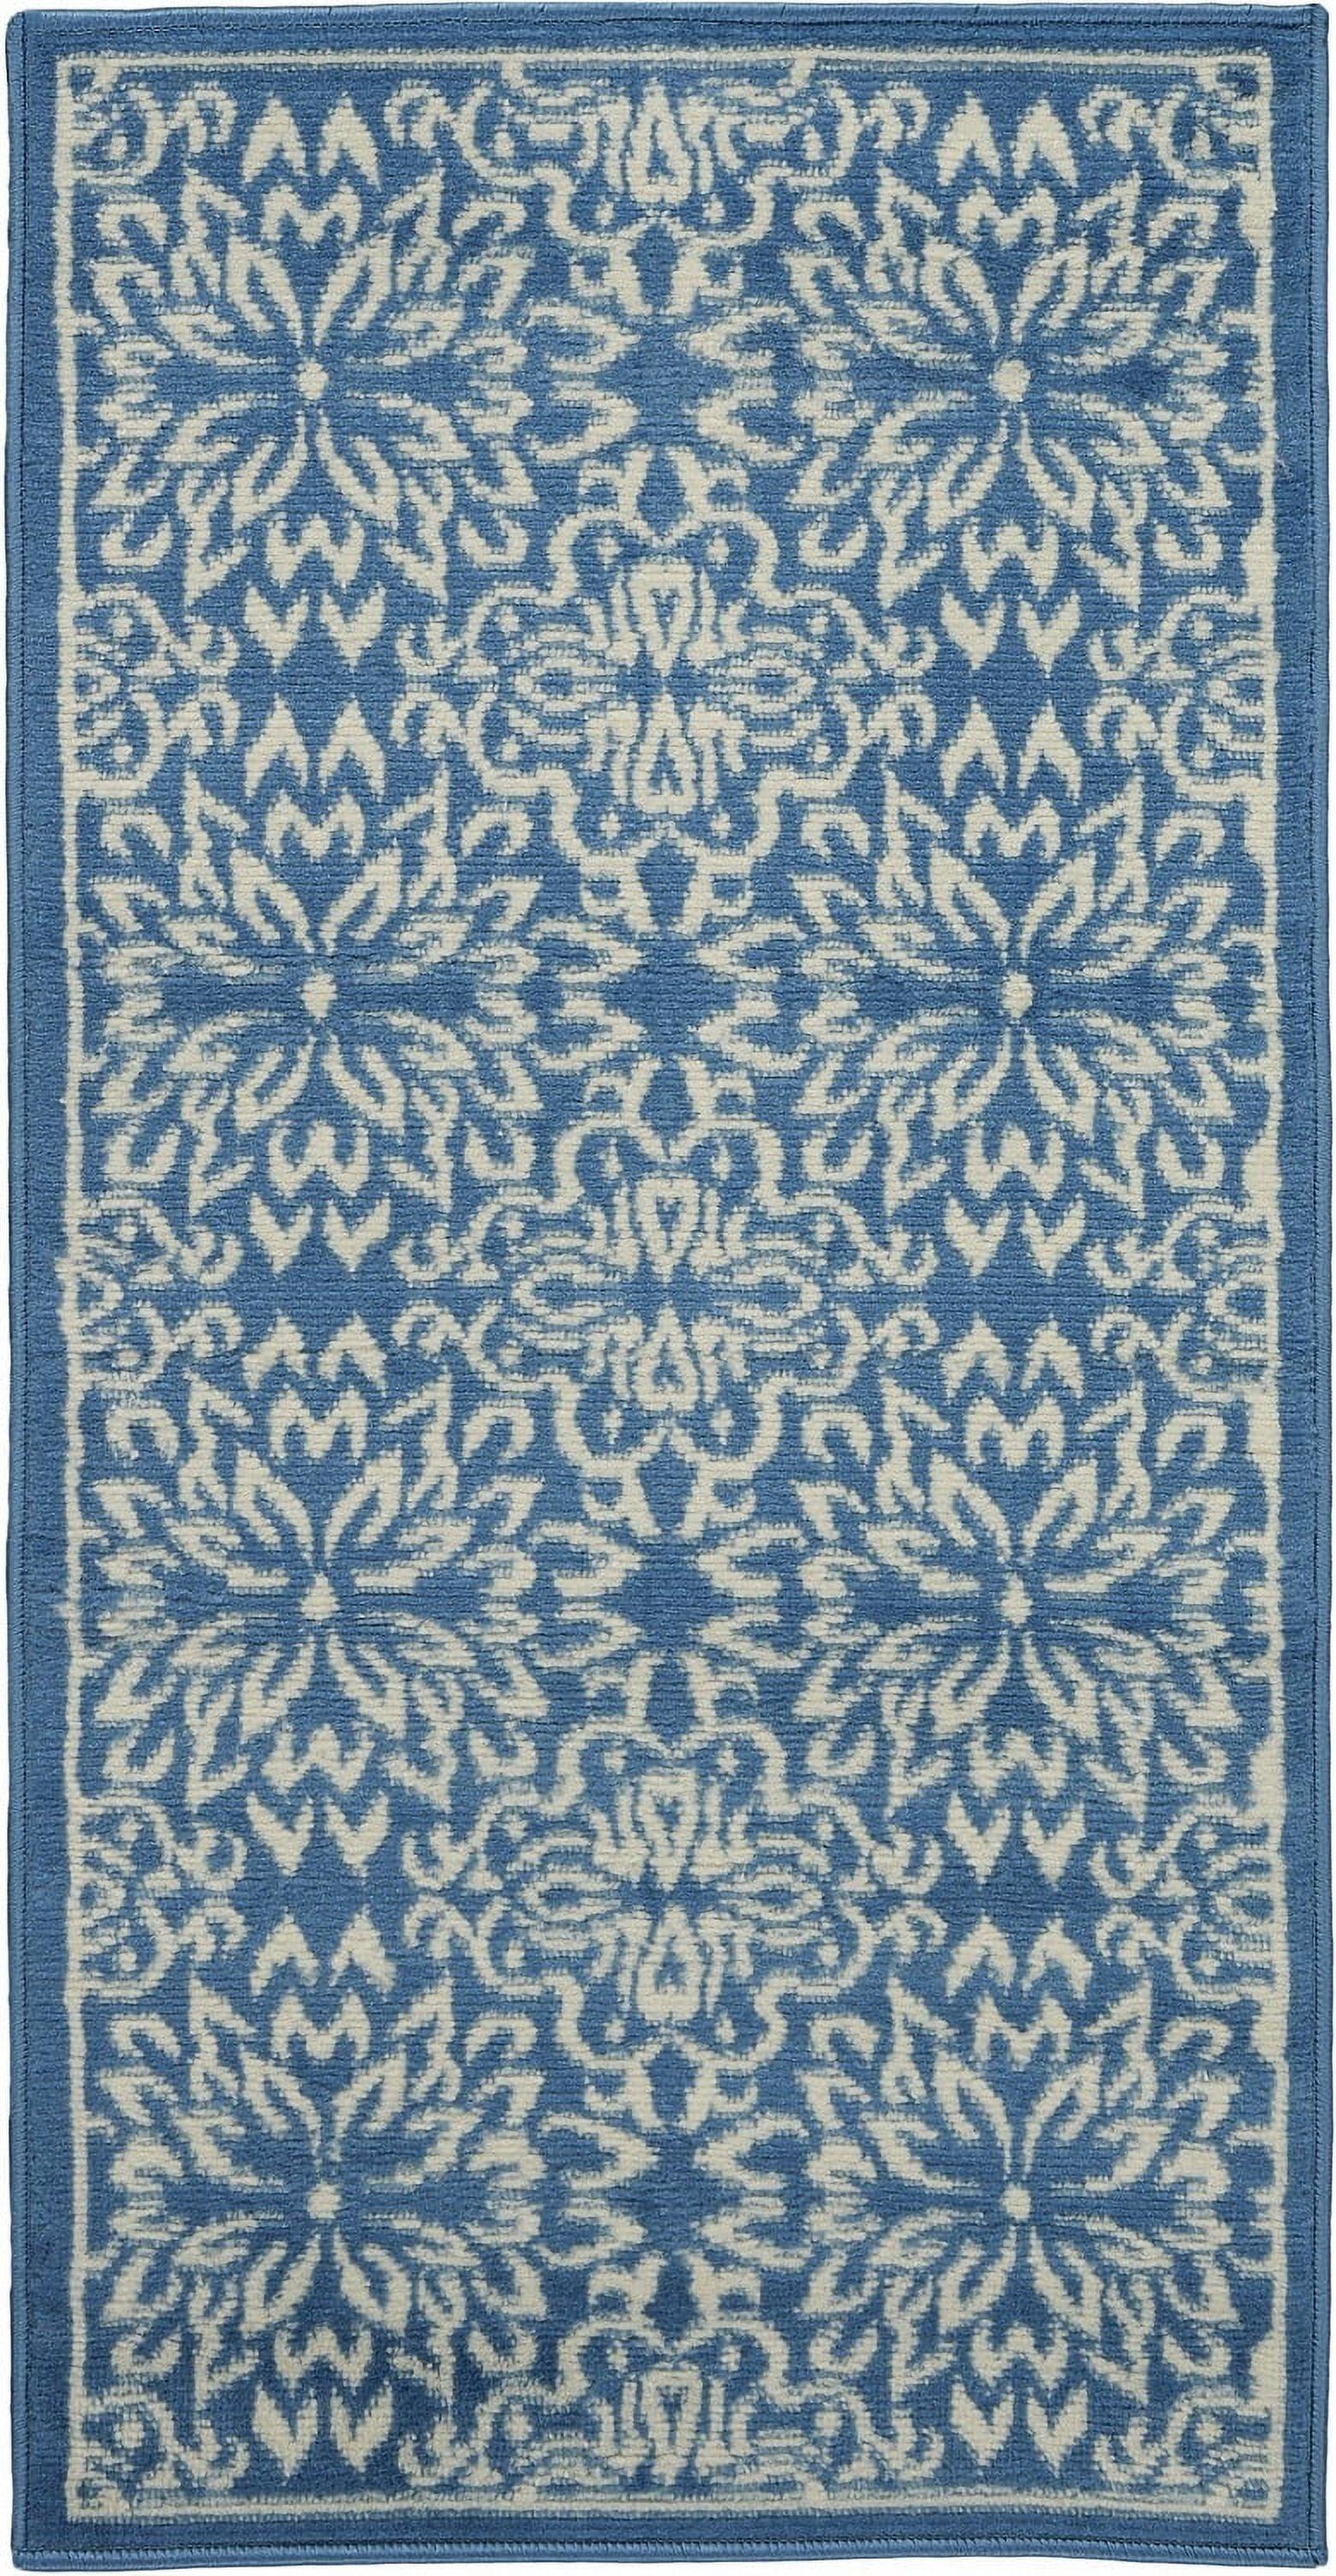 Ivory & Blue Floral Hand-Knotted Viscose Area Rug, 2' x 4'